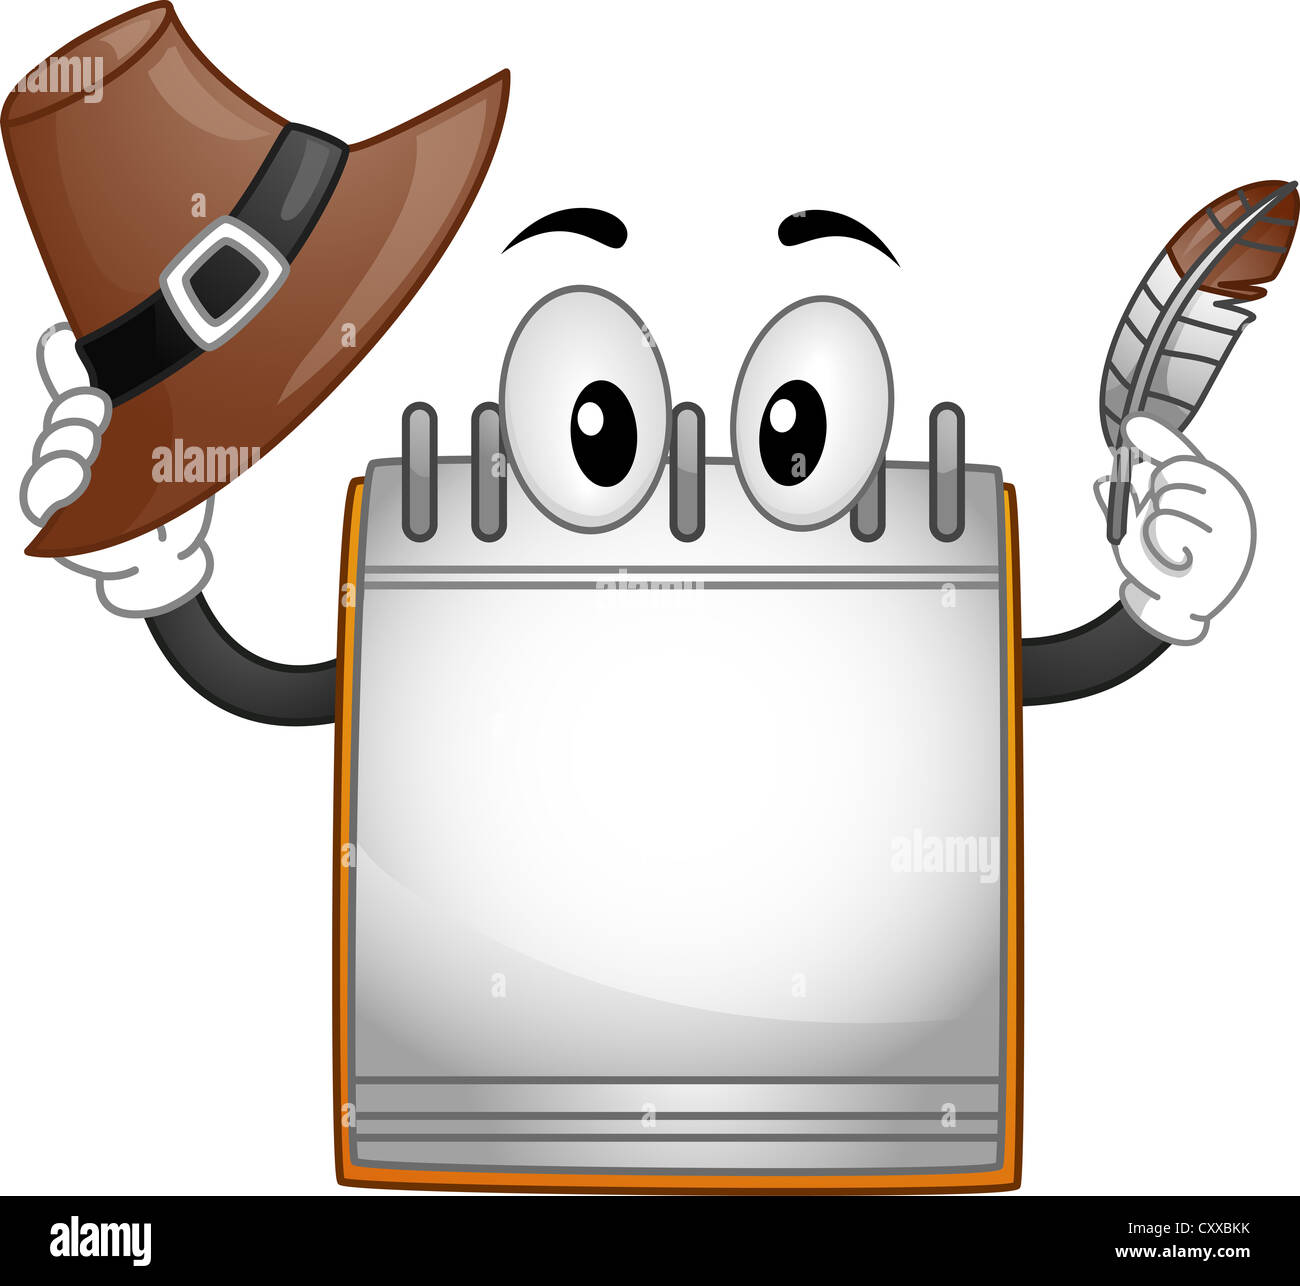 Thanksgiving Illustration Featuring a Calendar Mascot Holding a Quill Pen and a Pilgrim's Hat Stock Photo